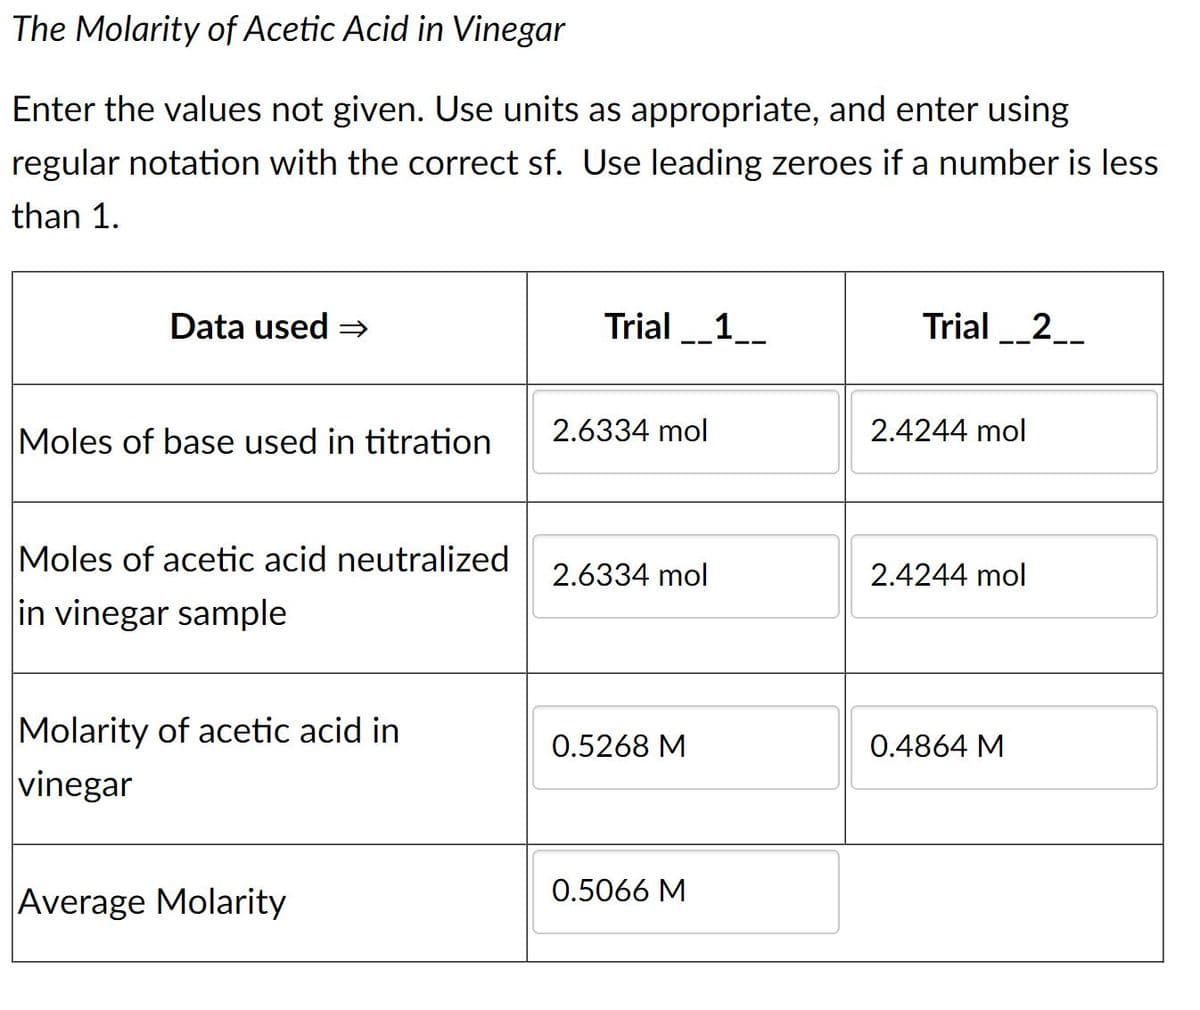 The Molarity of Acetic Acid in Vinegar
Enter the values not given. Use units as appropriate, and enter using
regular notation with the correct sf. Use leading zeroes if a number is less
than 1.
Data used =
Trial _1__
Trial _2__
2.6334 mol
2.4244 mol
Moles of base used in titration
Moles of acetic acid neutralized
2.6334 mol
2.4244 mol
in vinegar sample
Molarity of acetic acid in
0.5268 M
0.4864 M
vinegar
0.5066 M
Average Molarity
